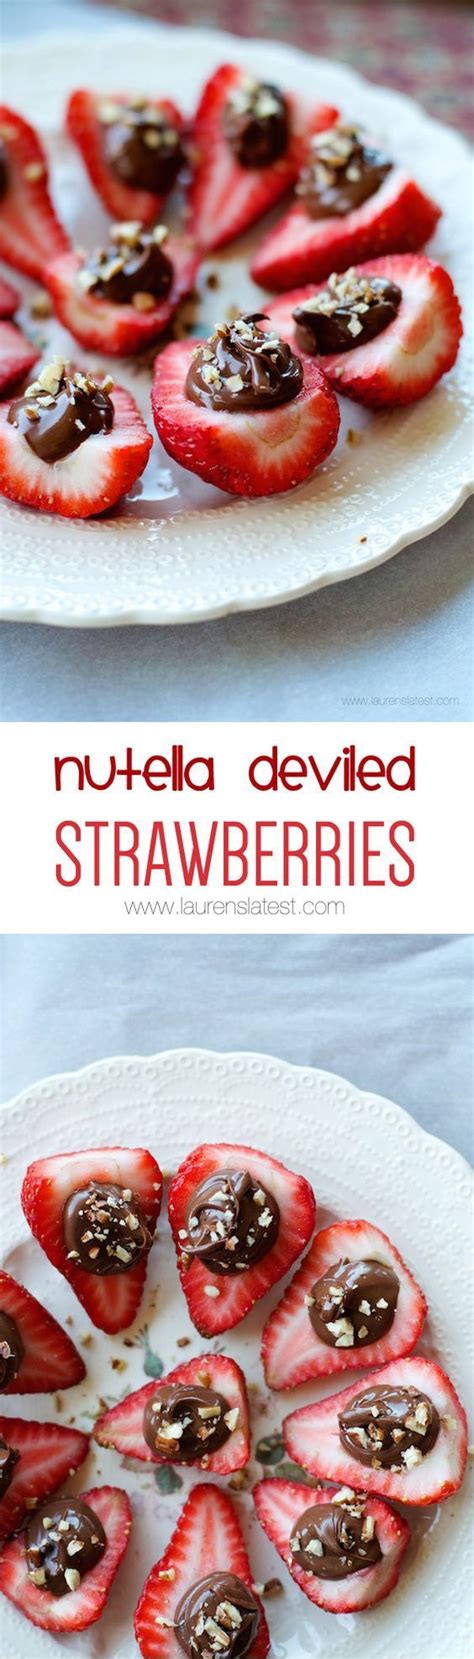 If you like the look of the deviled strawberries with the stems you can leave them on. Nutella Deviled Strawberries | Recipe (With images ...